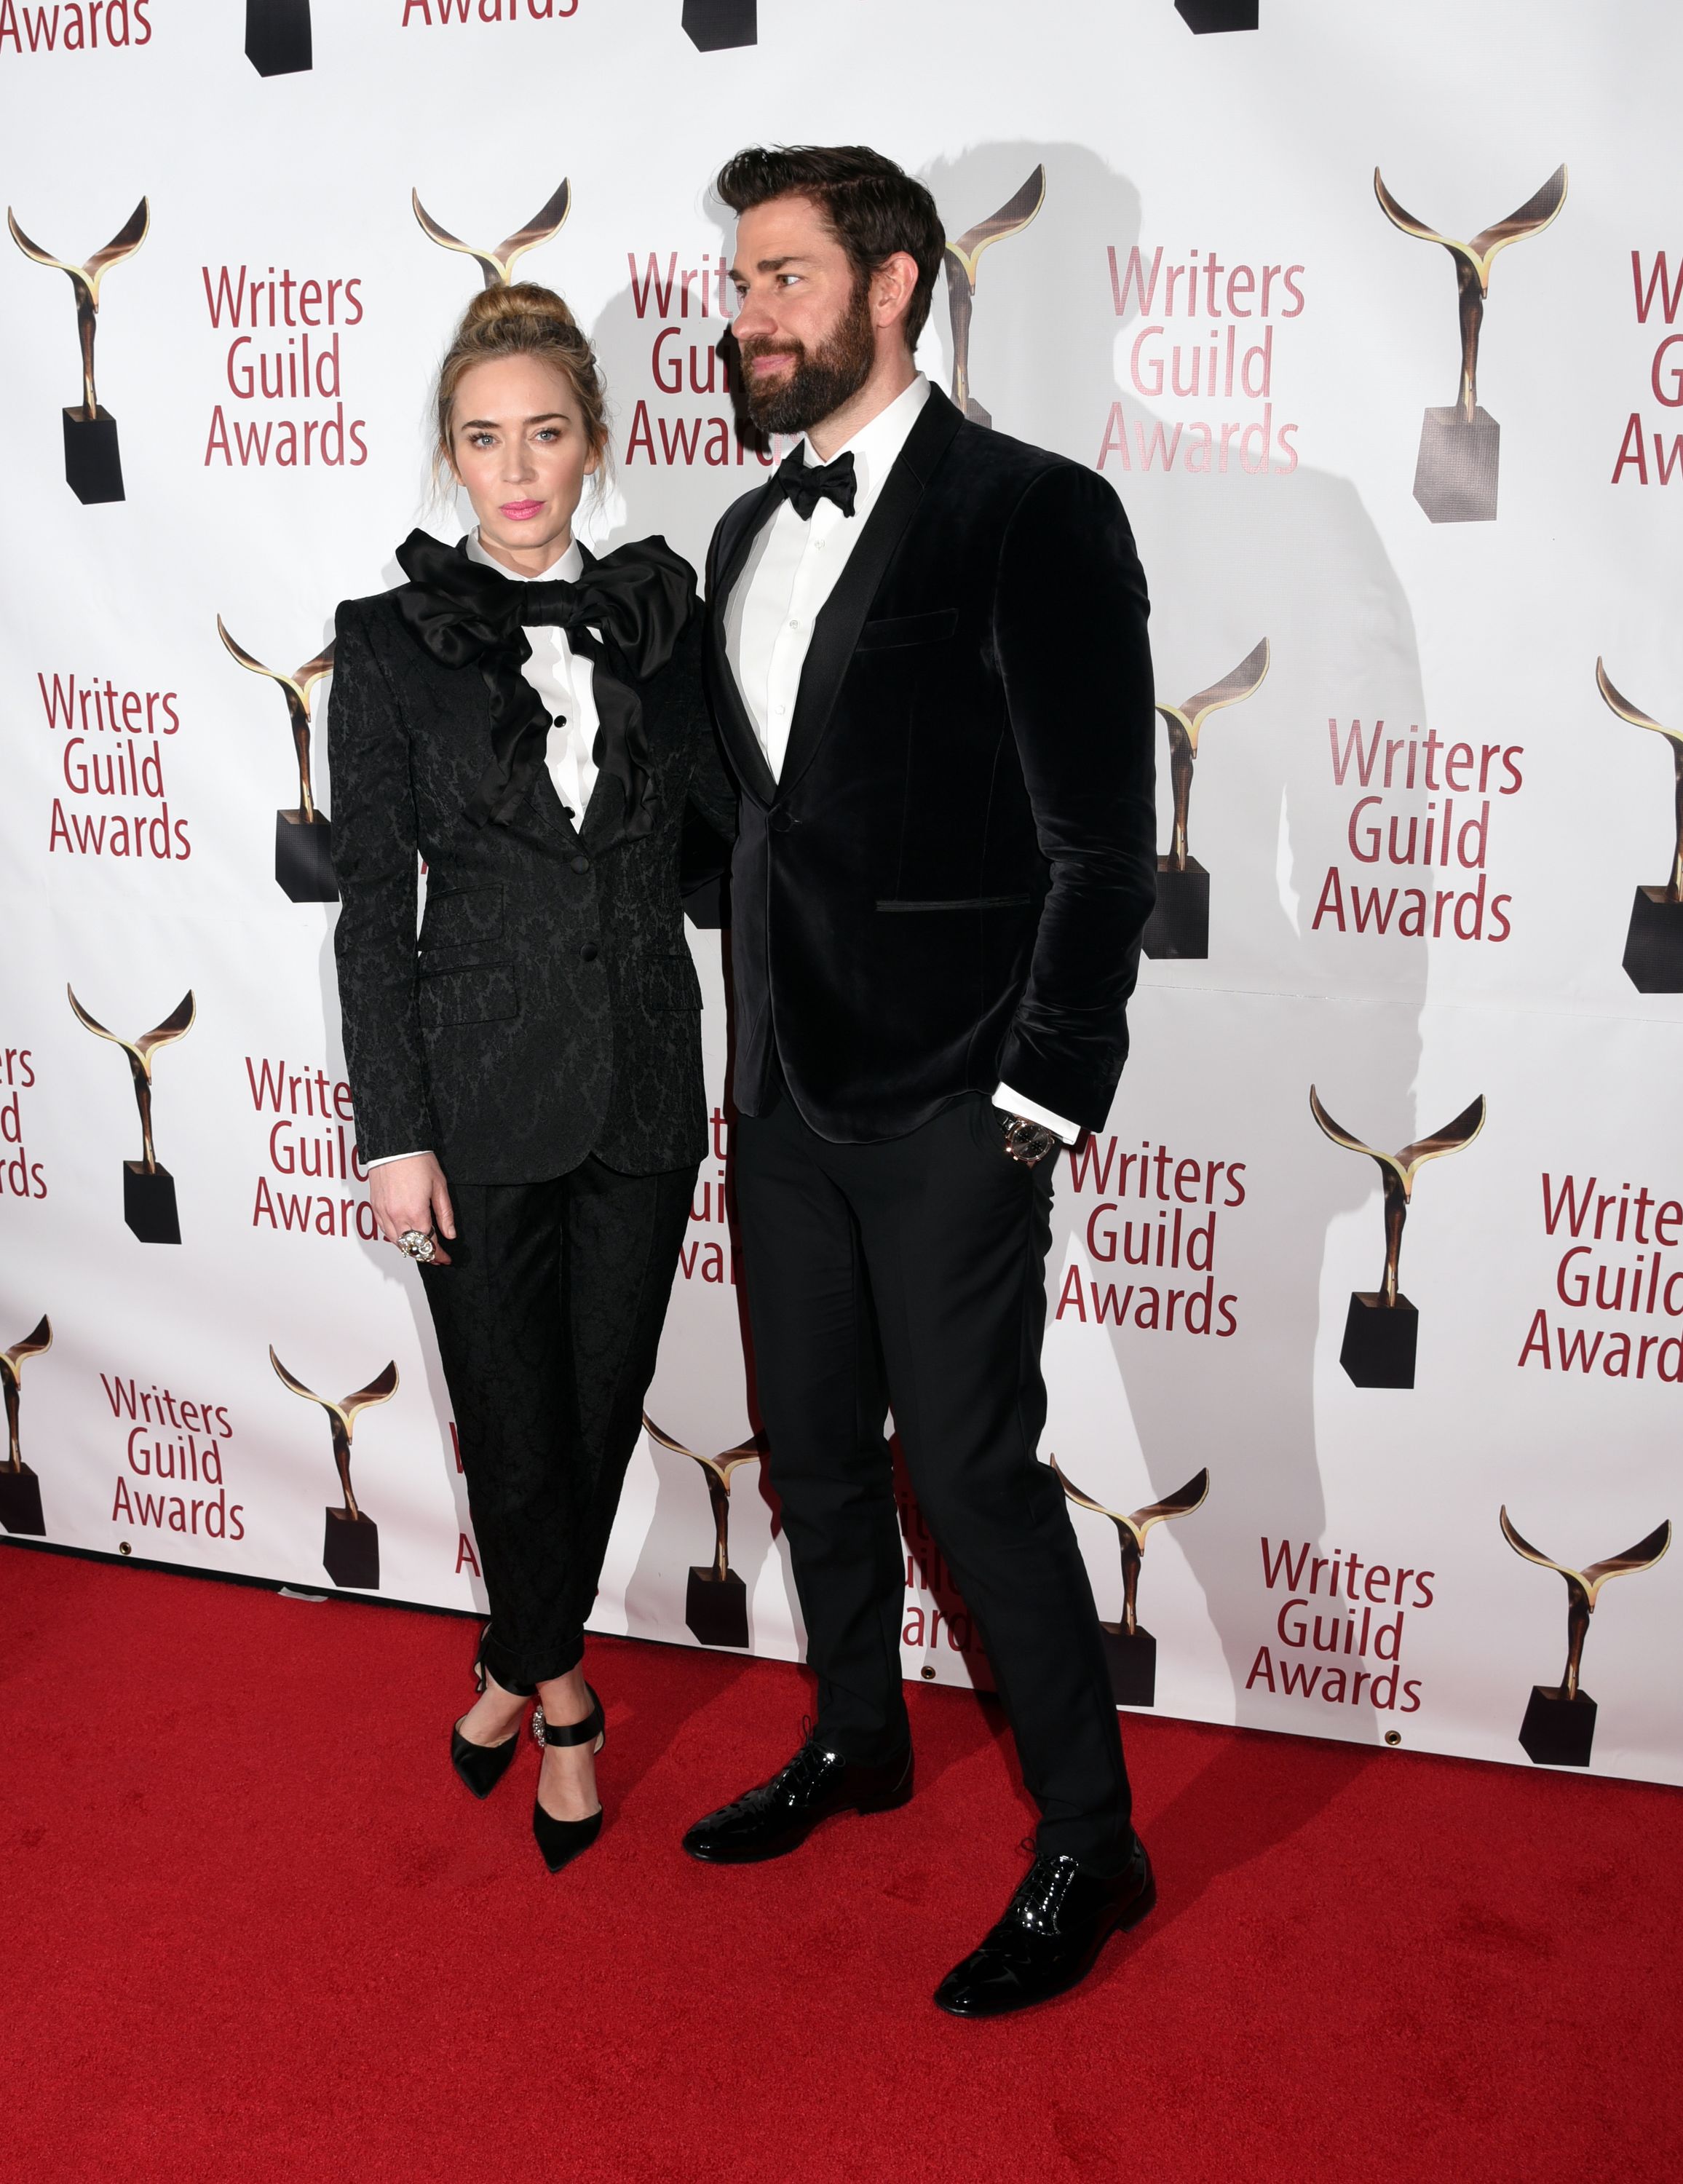 2019-02-17-71st-Annual-Writers-Guild-Awards-142.jpg